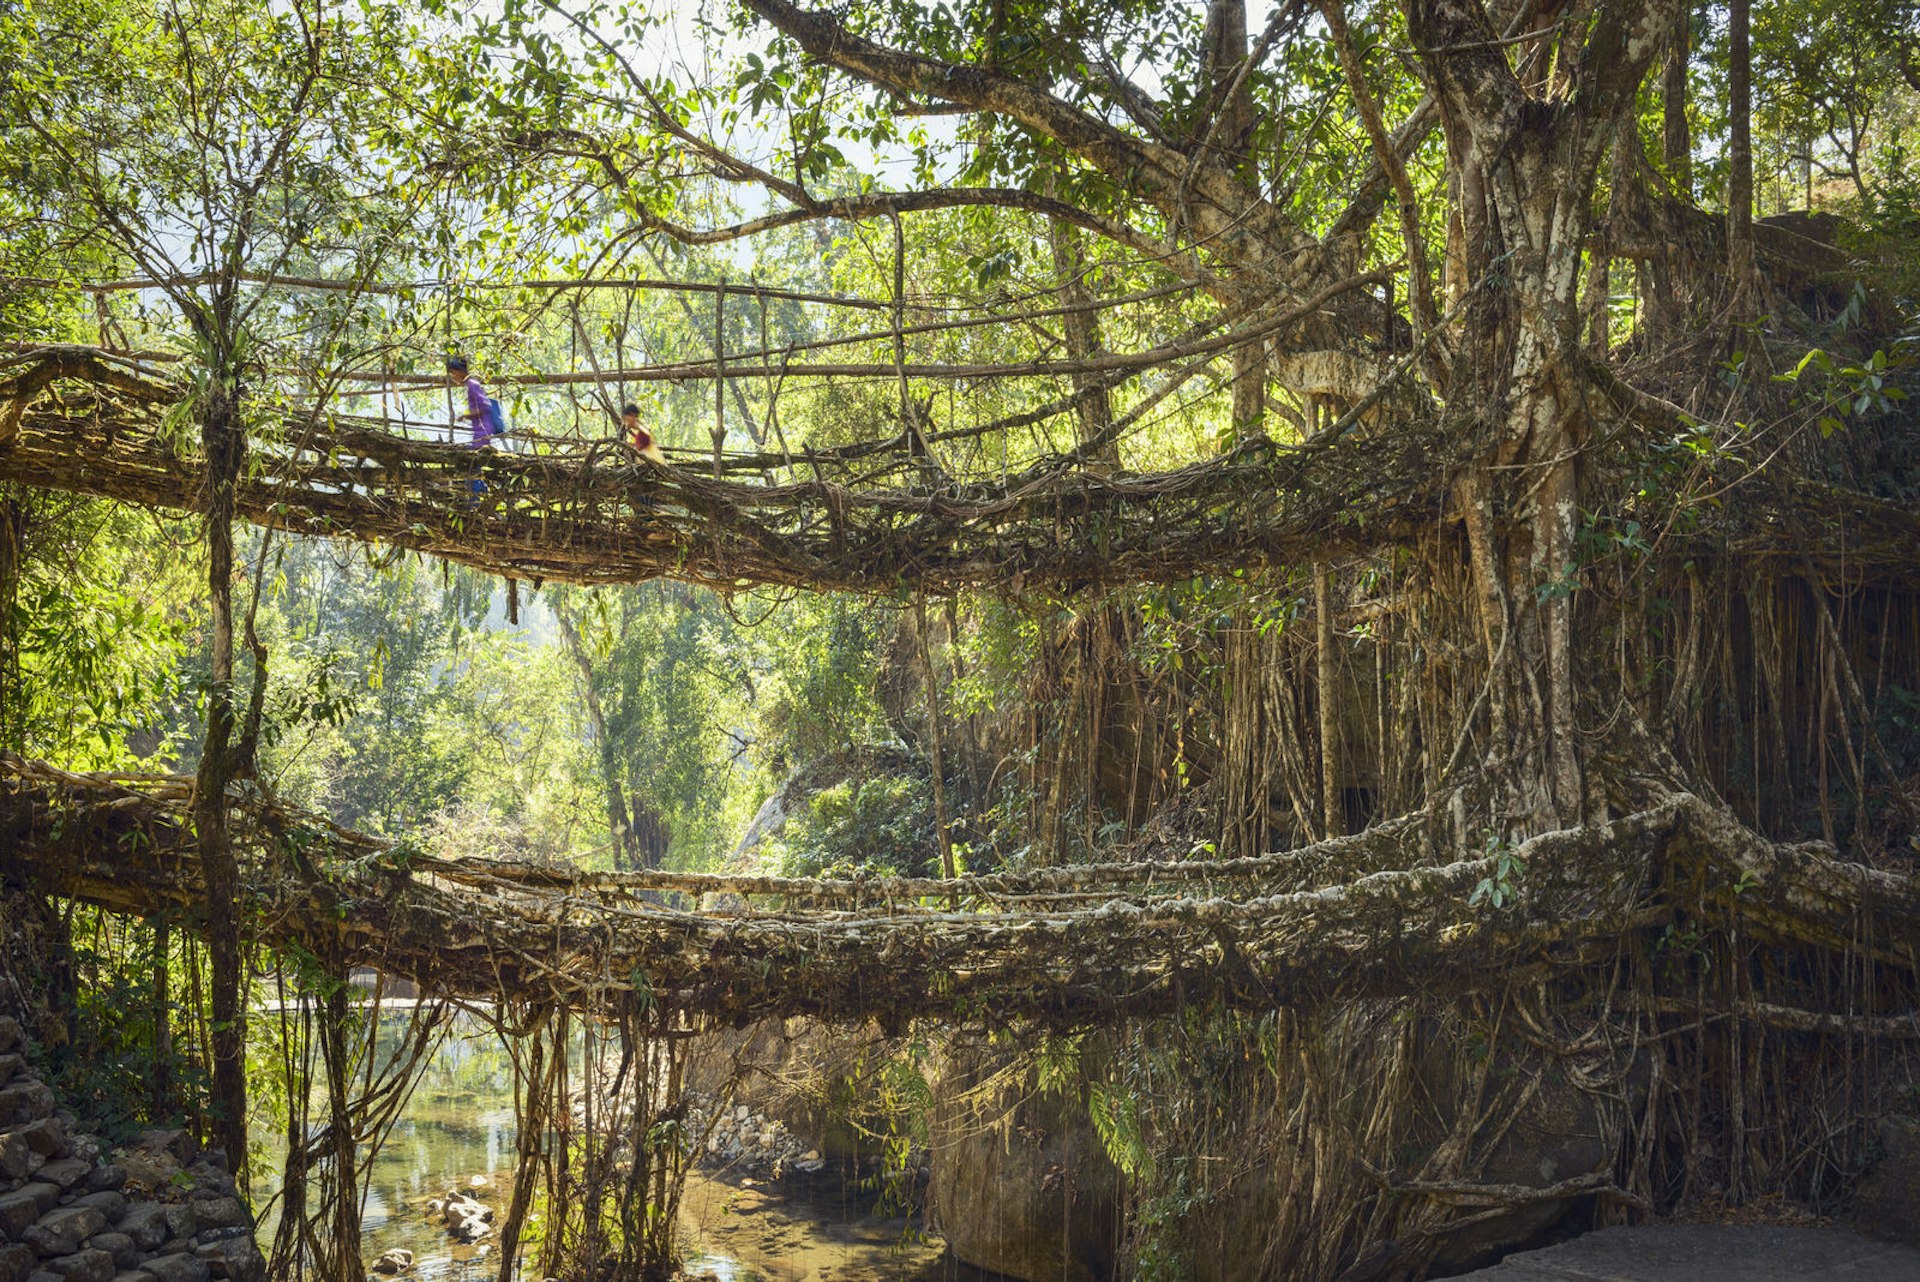 The Double Decker root bridge near Nongriat is formed from the aerial roots of rubber trees which are coaxed into spanning crevasses. Two young children walk across the higher of the two bridges